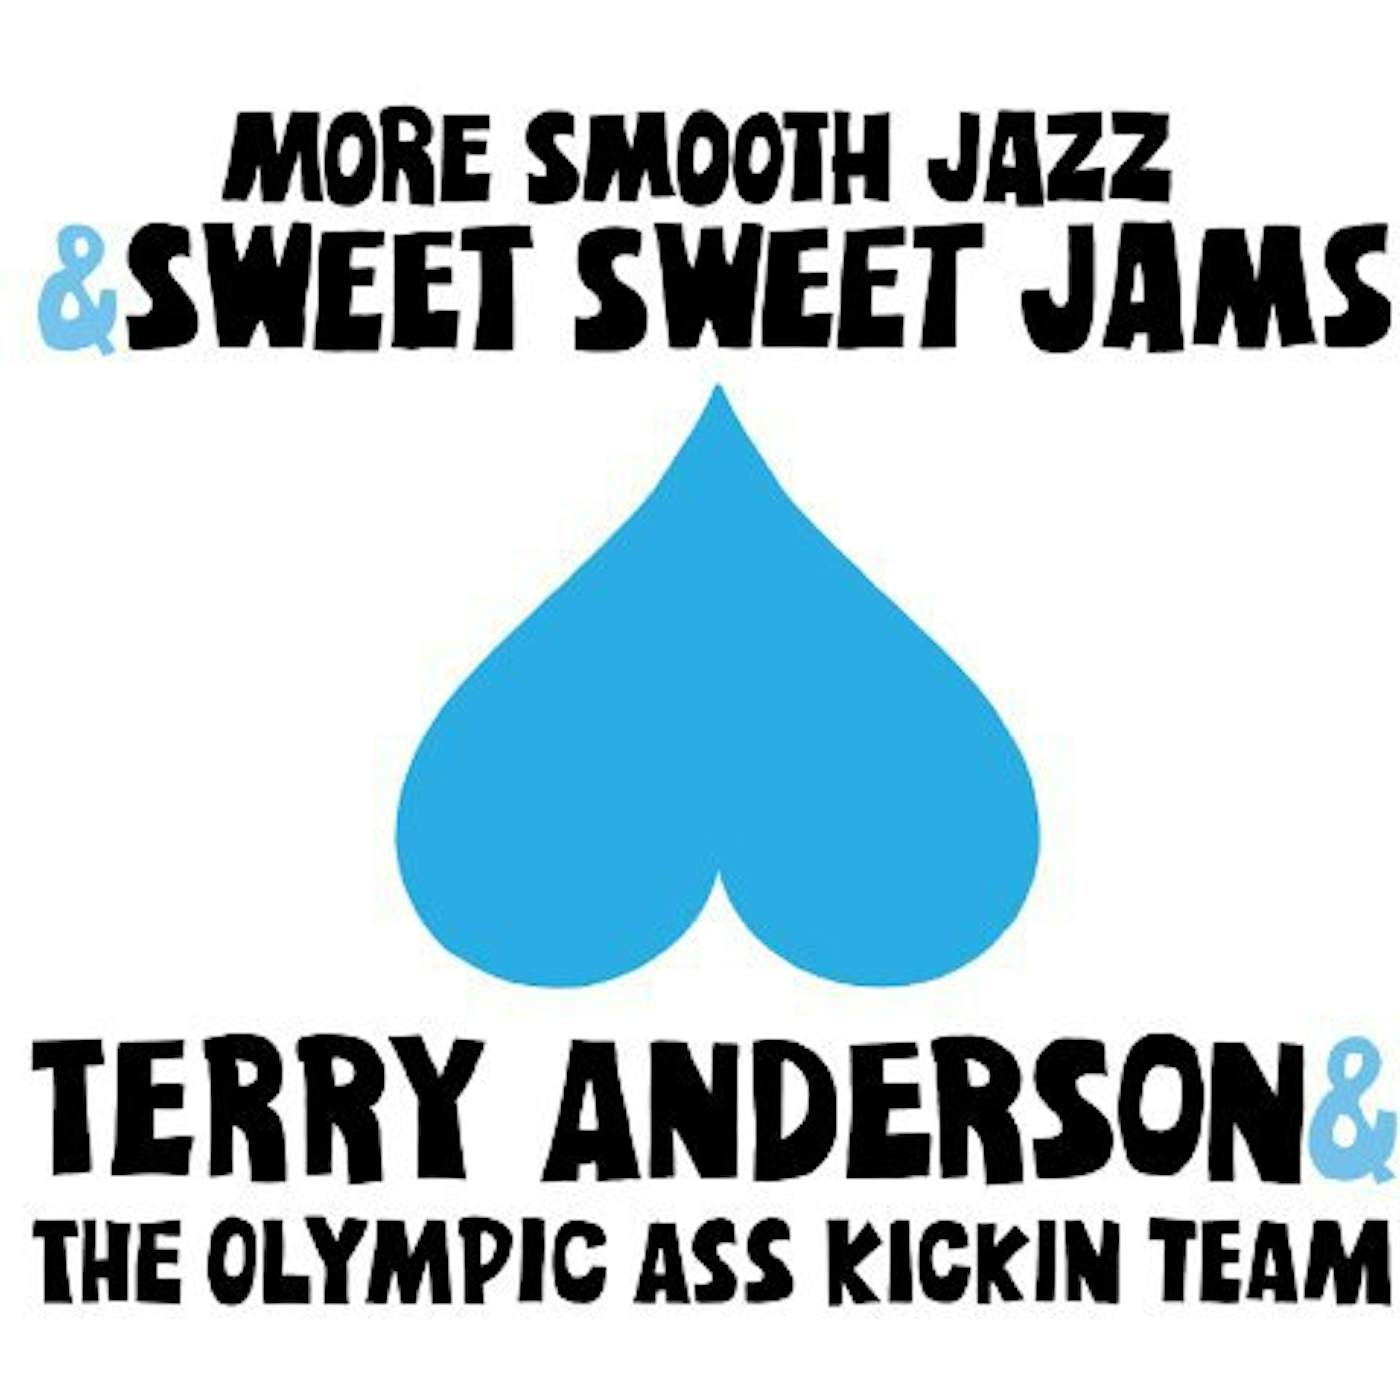 Terry Anderson & The Olympic Ass-Kickin Team More Smooth Jazz & Sweet Sweet Jams Vinyl Record